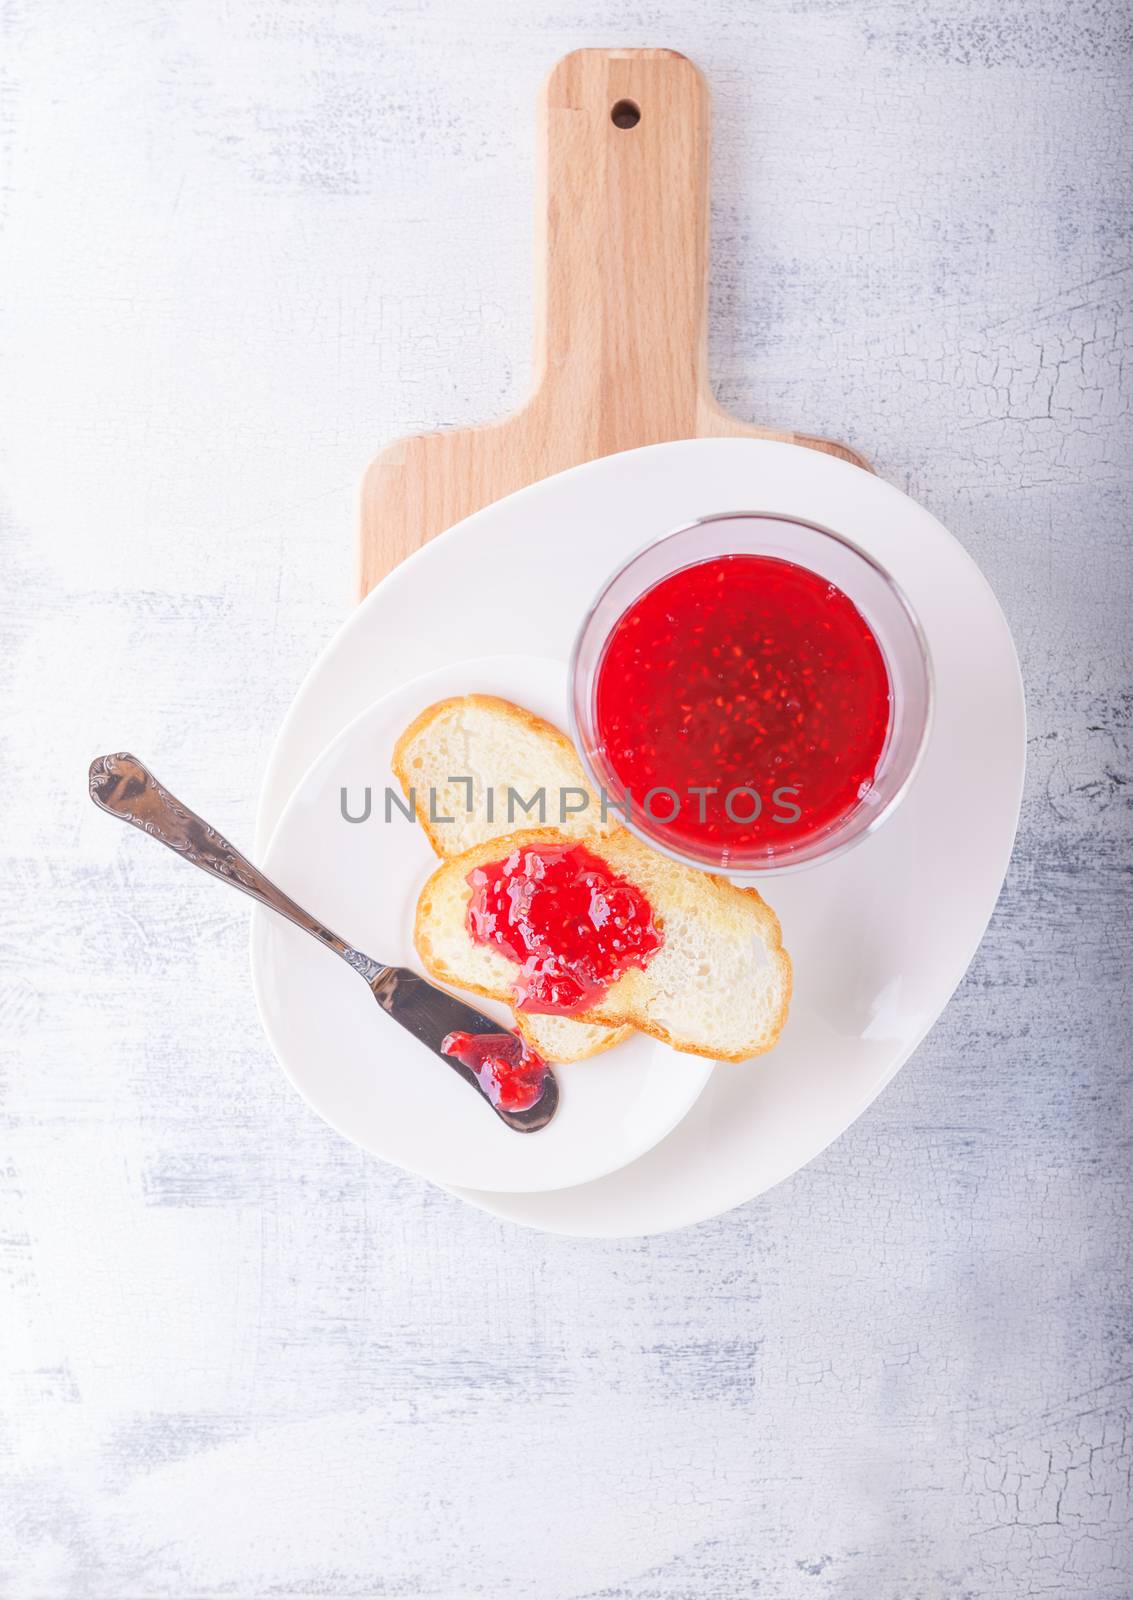 Raspberry jam in bowl with toast and knife